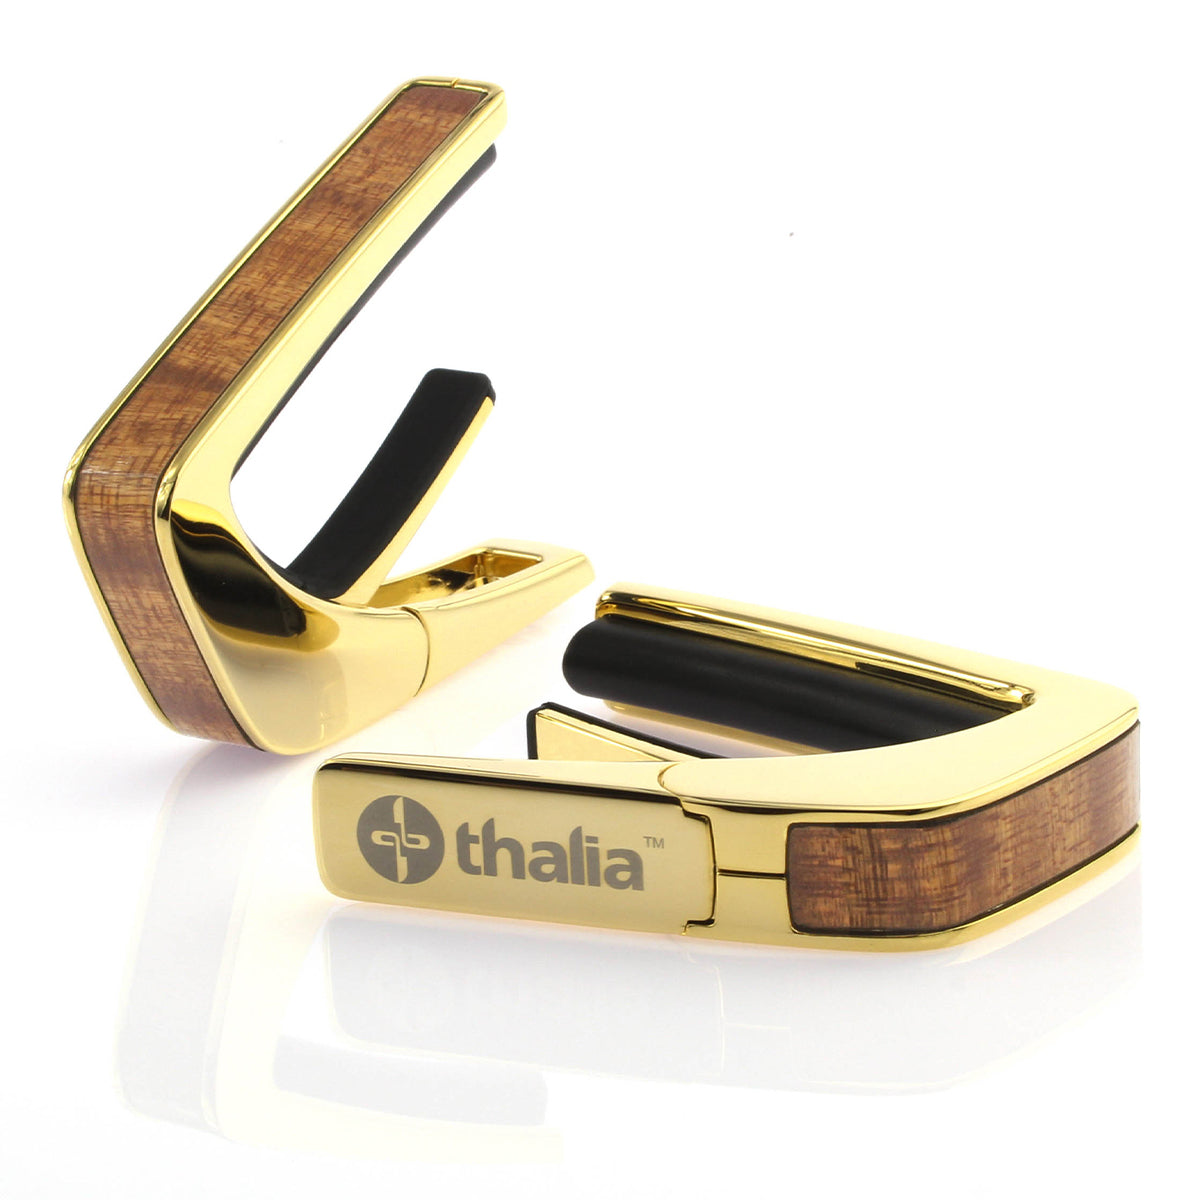 Thalia Exotic Series Wood Collection Capo ~ Gold with Sapele Inlay